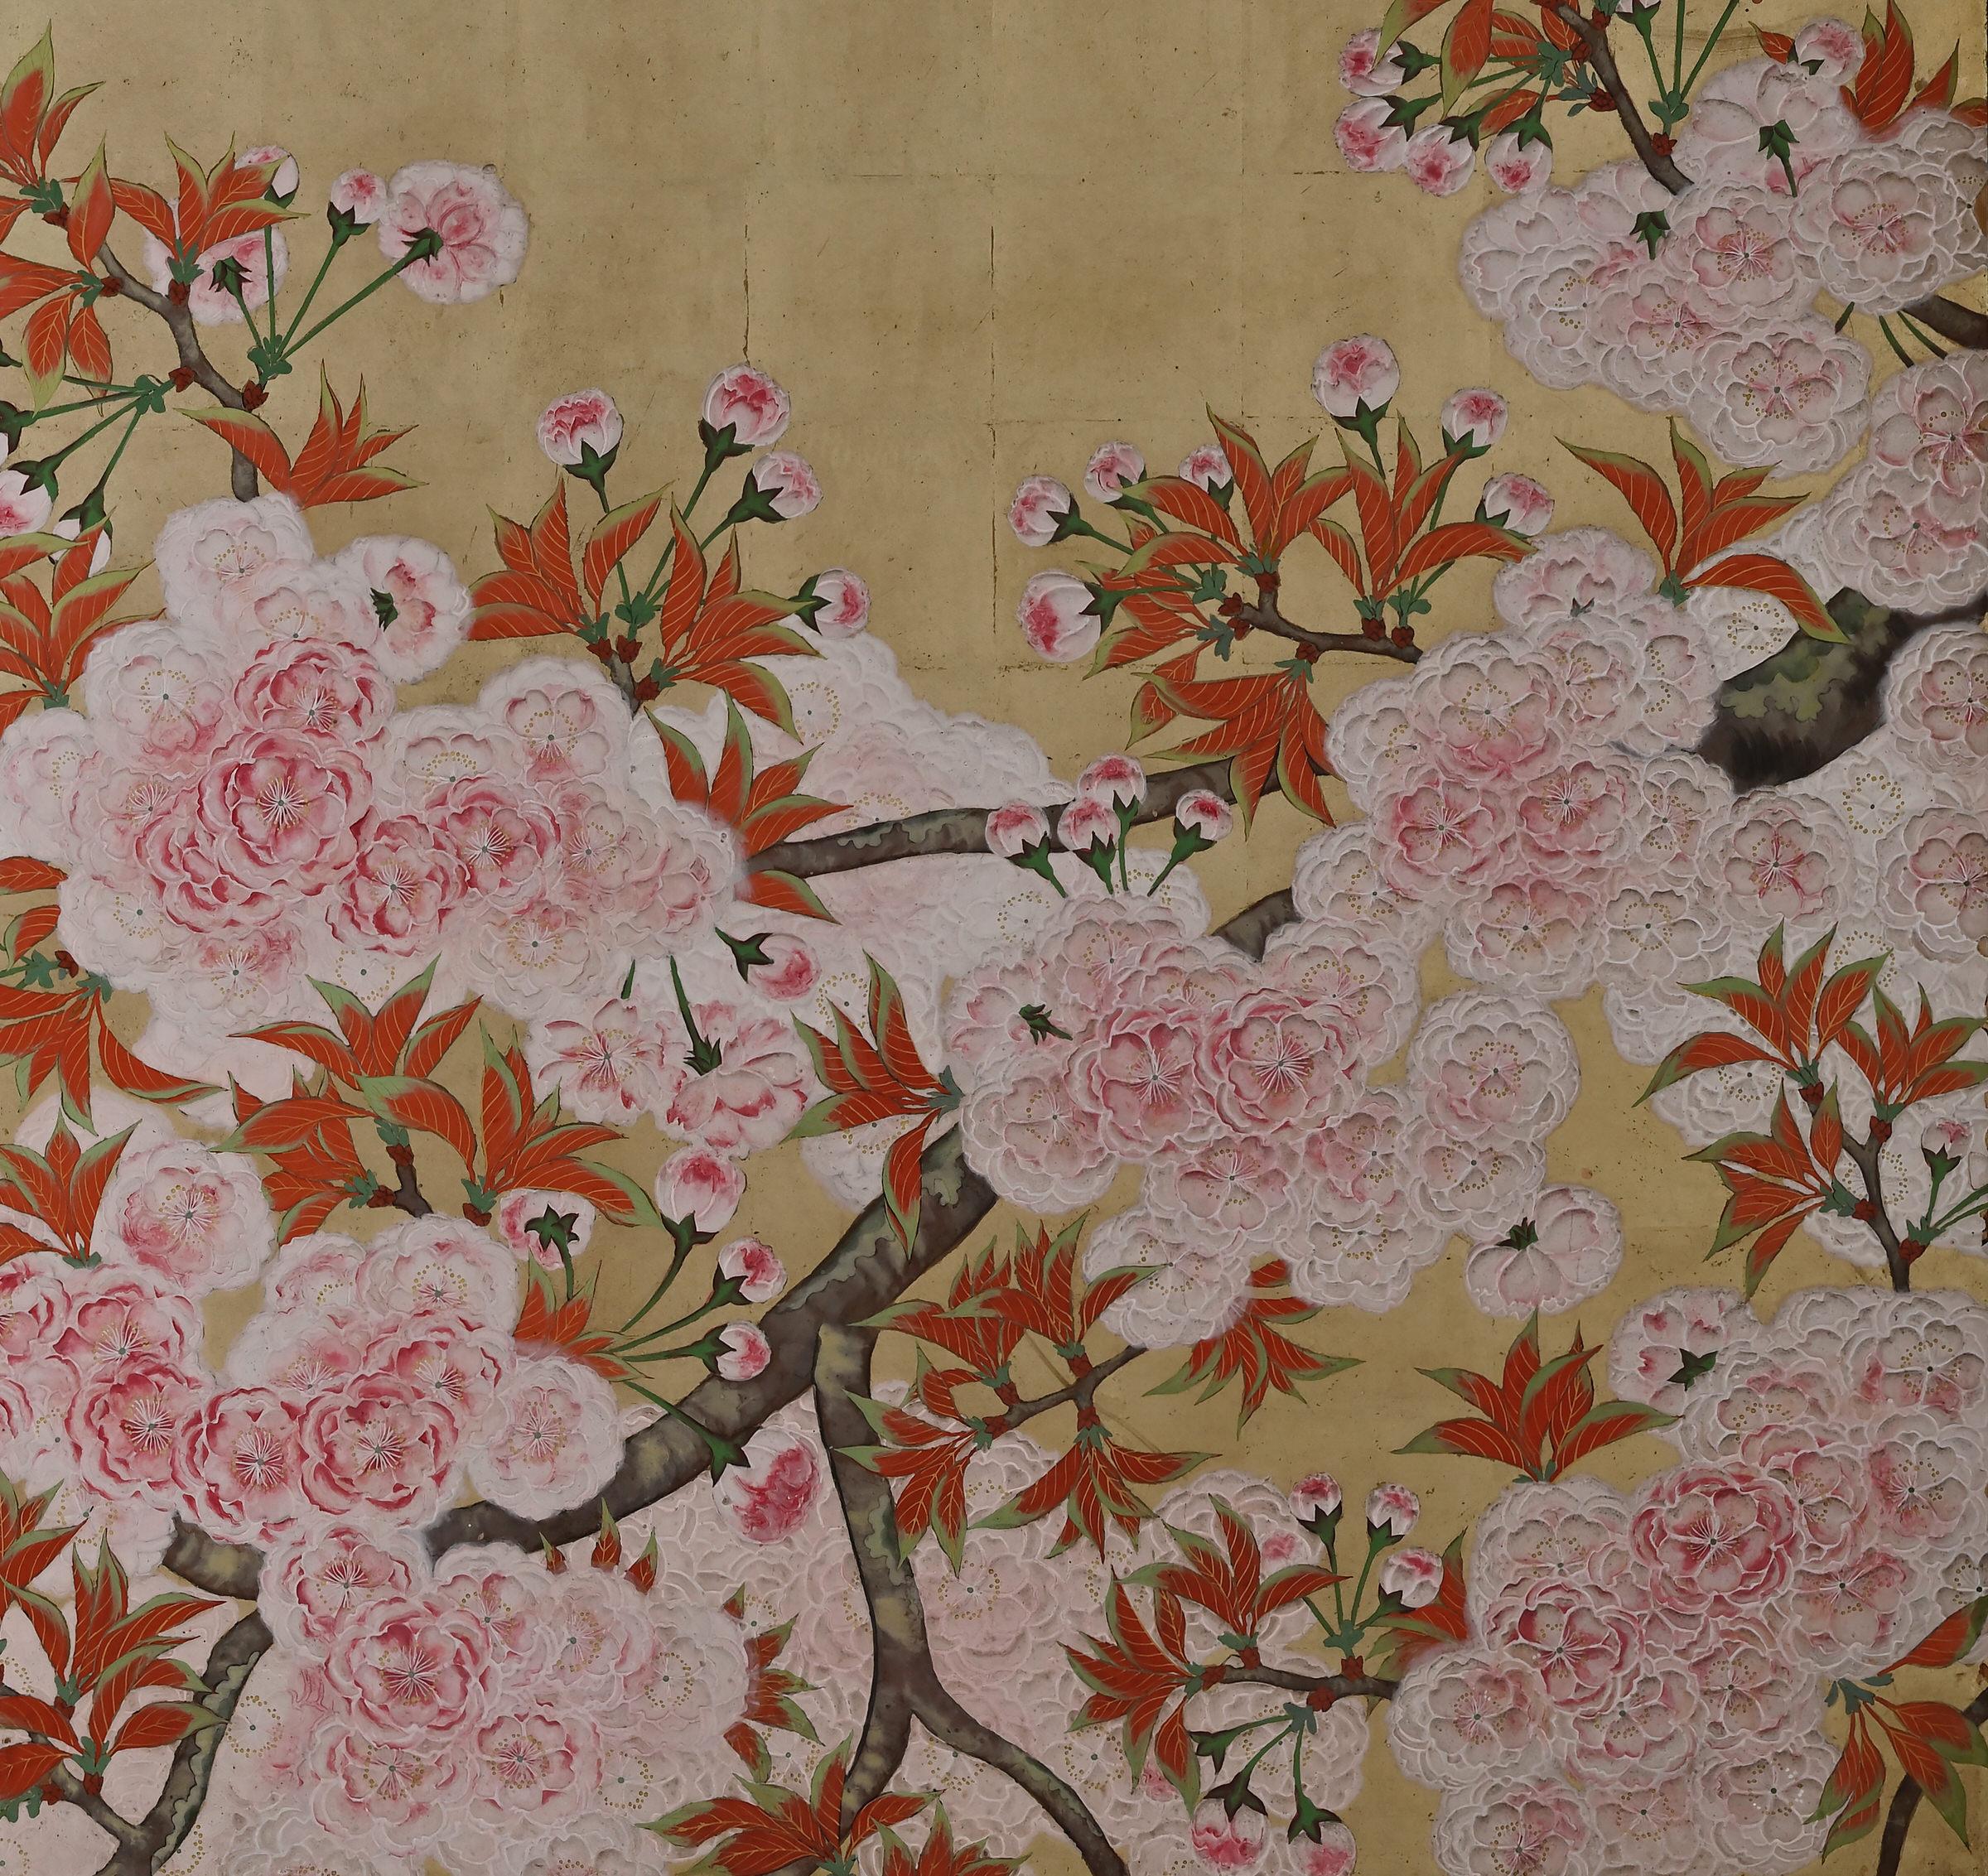 Cherry Blossoms

Kano Sanrakuki (1898-1981)

Showa period, circa 1930

2-panel Japanese Screen

Color, gofun and gold leaf on paper

Against a backdrop of gold-leafed ground, the lichen covered trunk and branches of the life-sized cherry